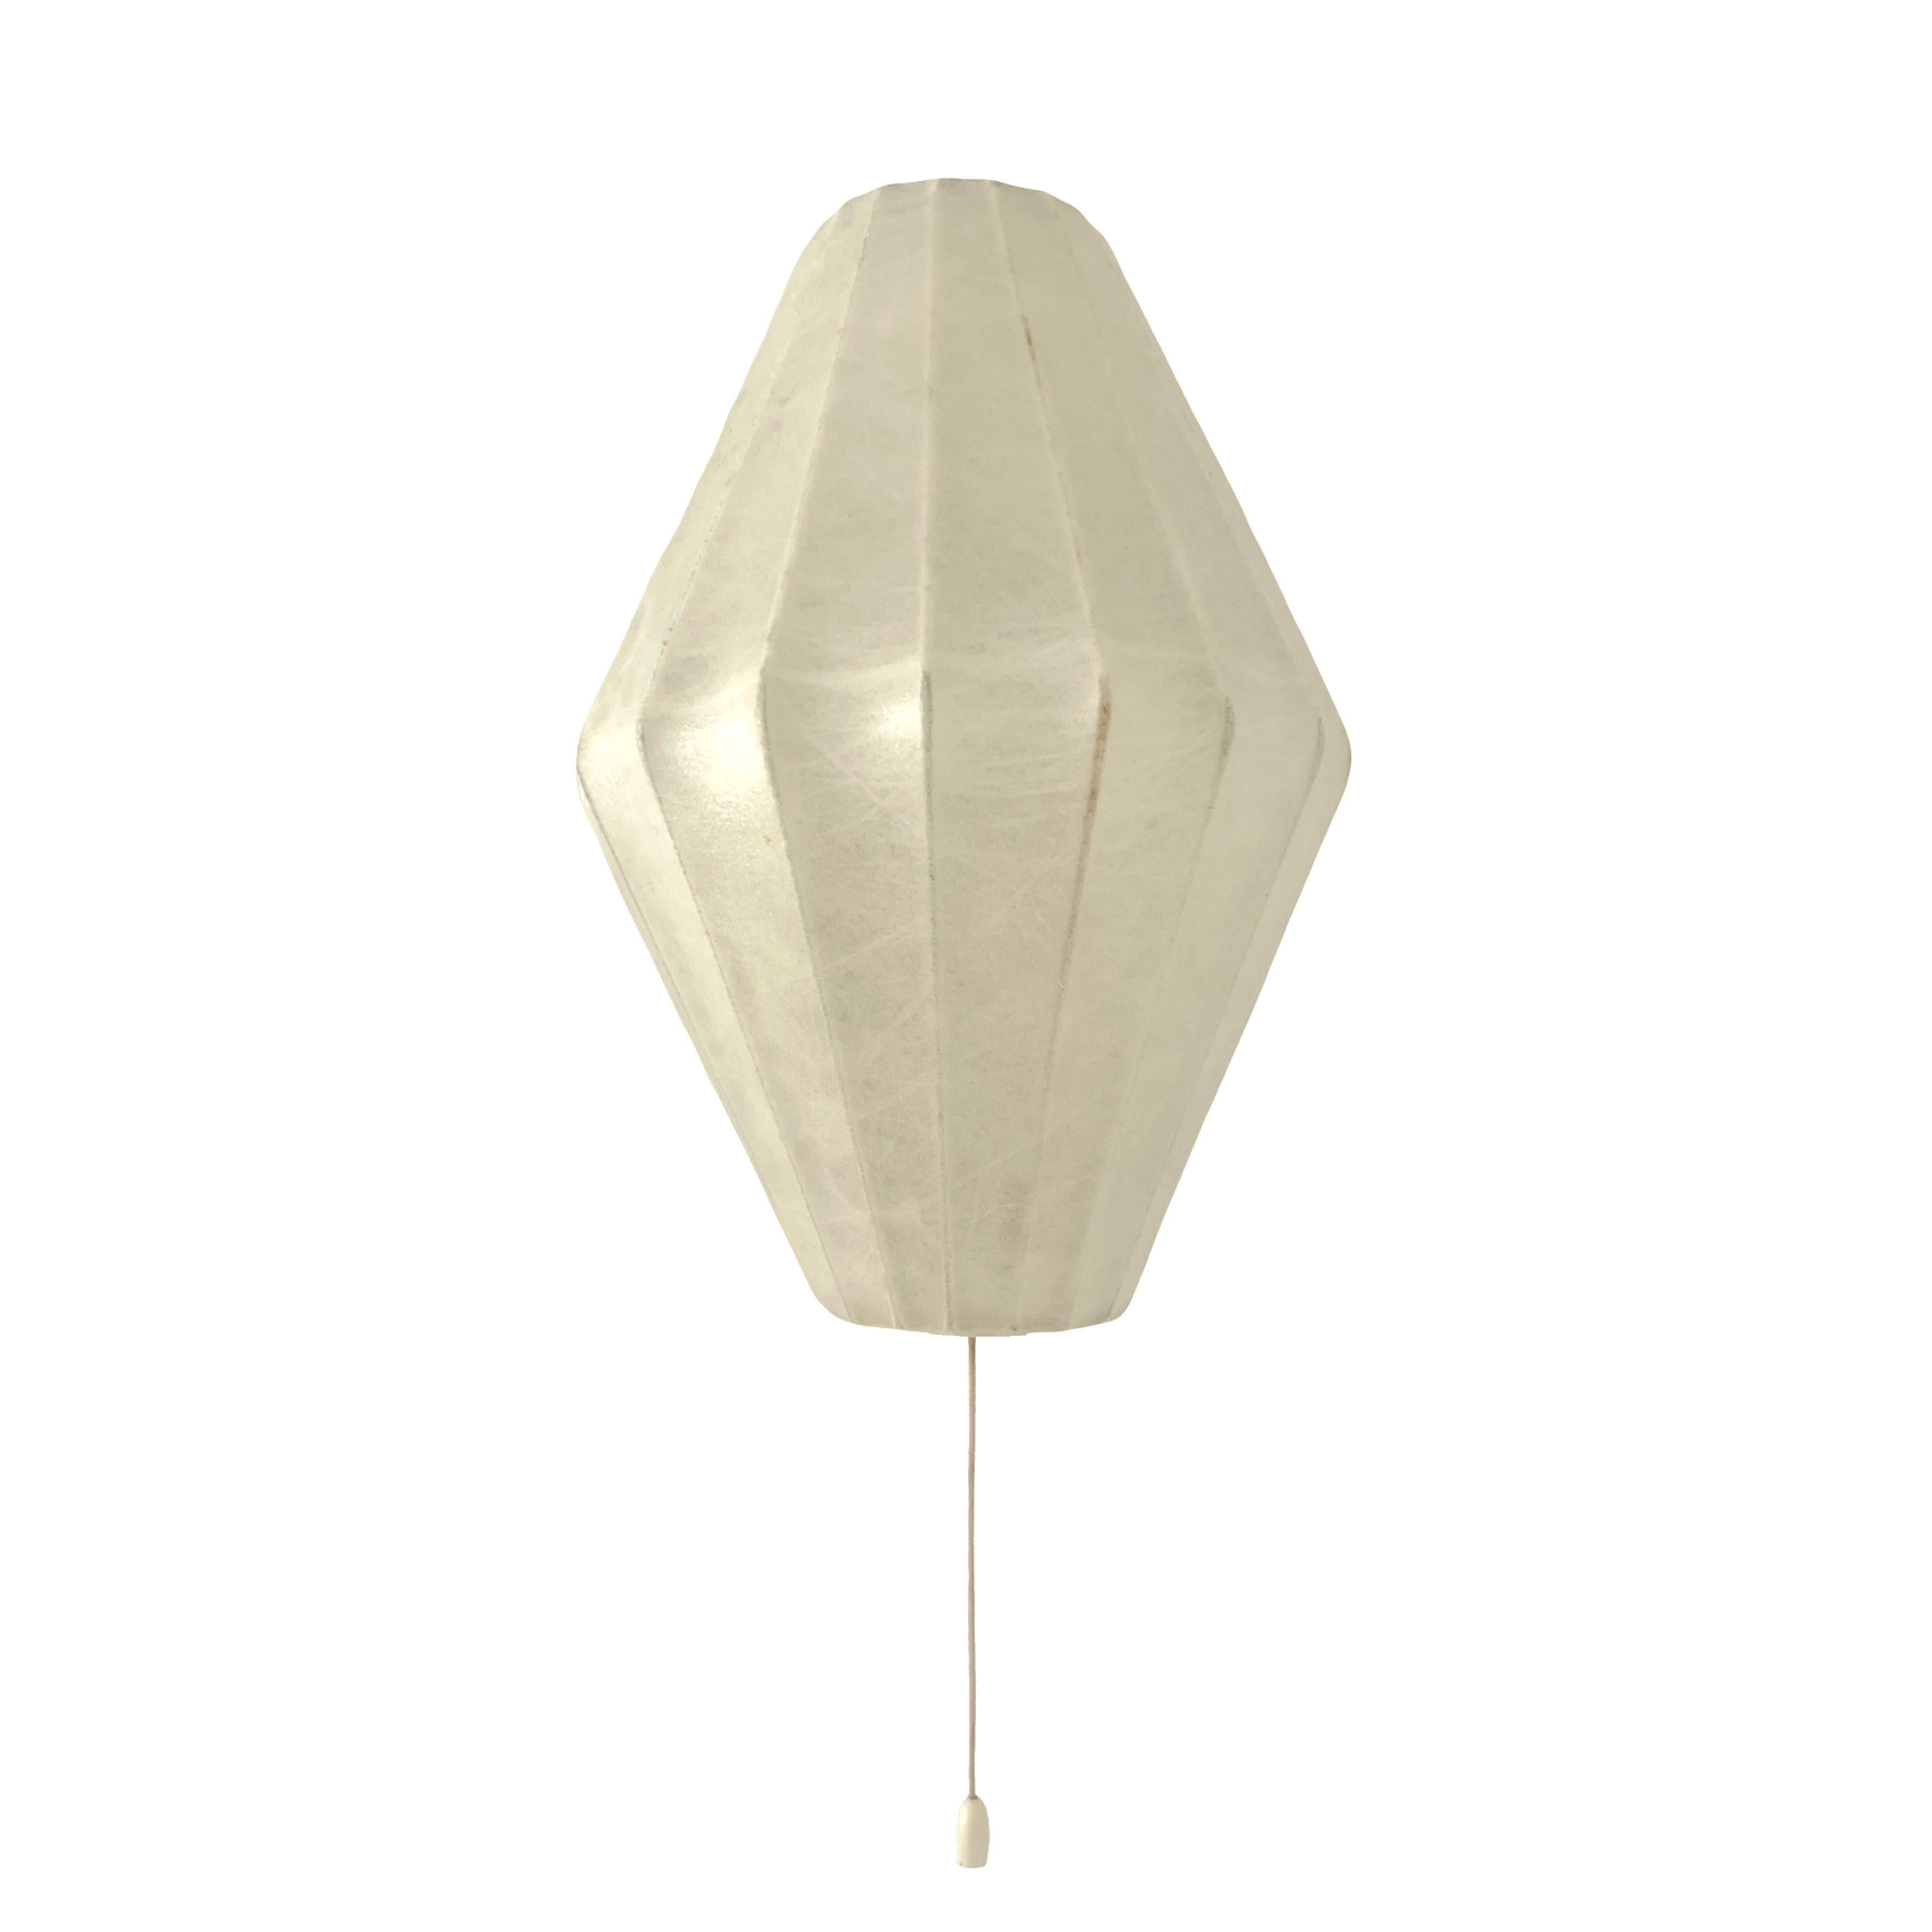 Beauty and stunning German Cocoon Pair of Wall Sconces. These fixtures was made during the 1960s in Germany by Friedel Wauer for Goldkant Leuchten.
